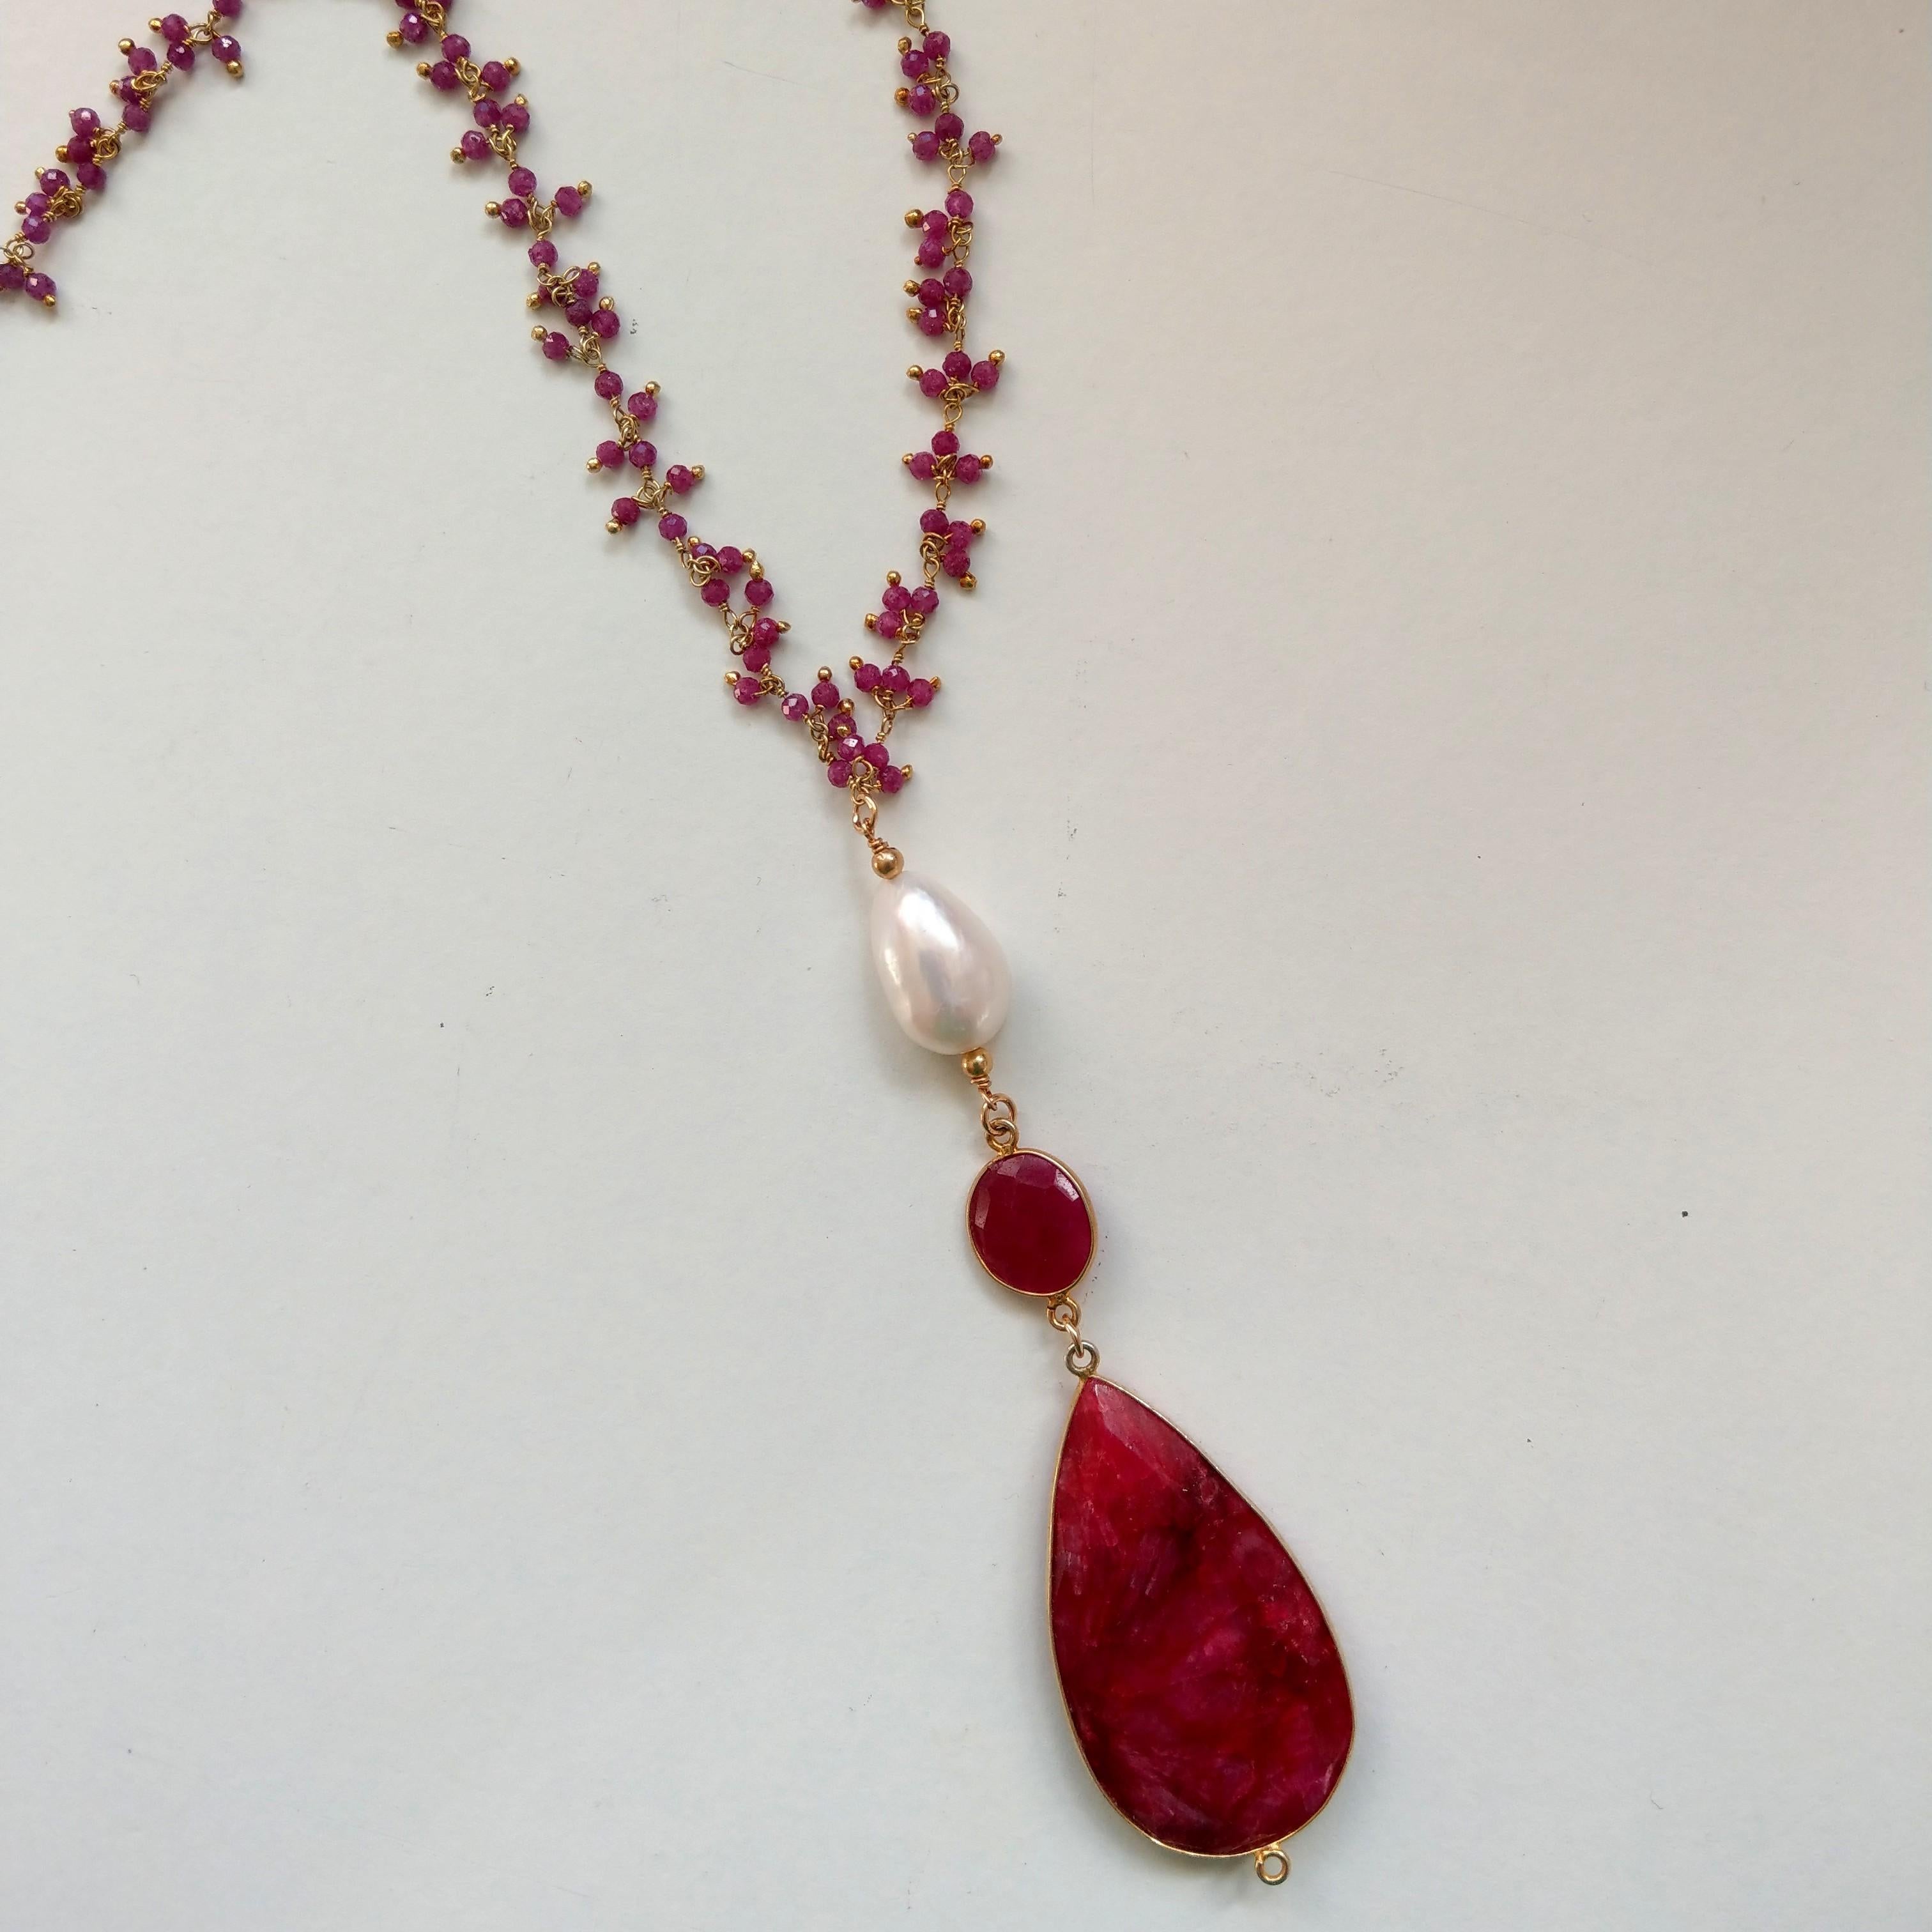 Hand made 3mm faceted Ruby dyed Gold plate Sterling Silver chain with a gold plate Sterling silver Ruby dyed and a 17x12mm Baroque Fresh water Pearl.

Total length of necklace 48cm, excluding pendant.



